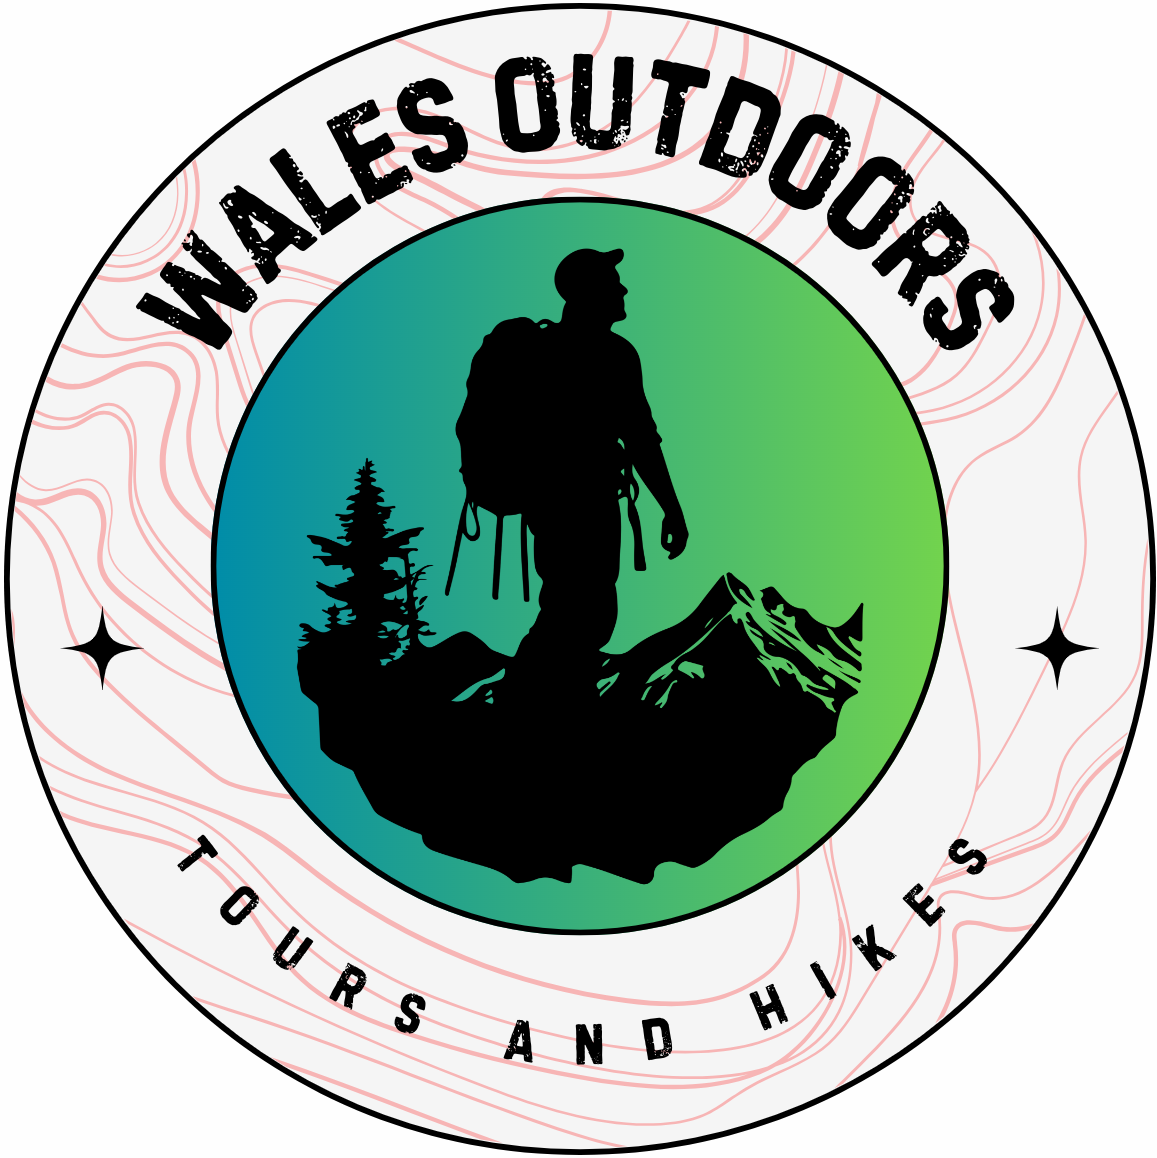 Wales Outdoors - Guided Tours And Hikes